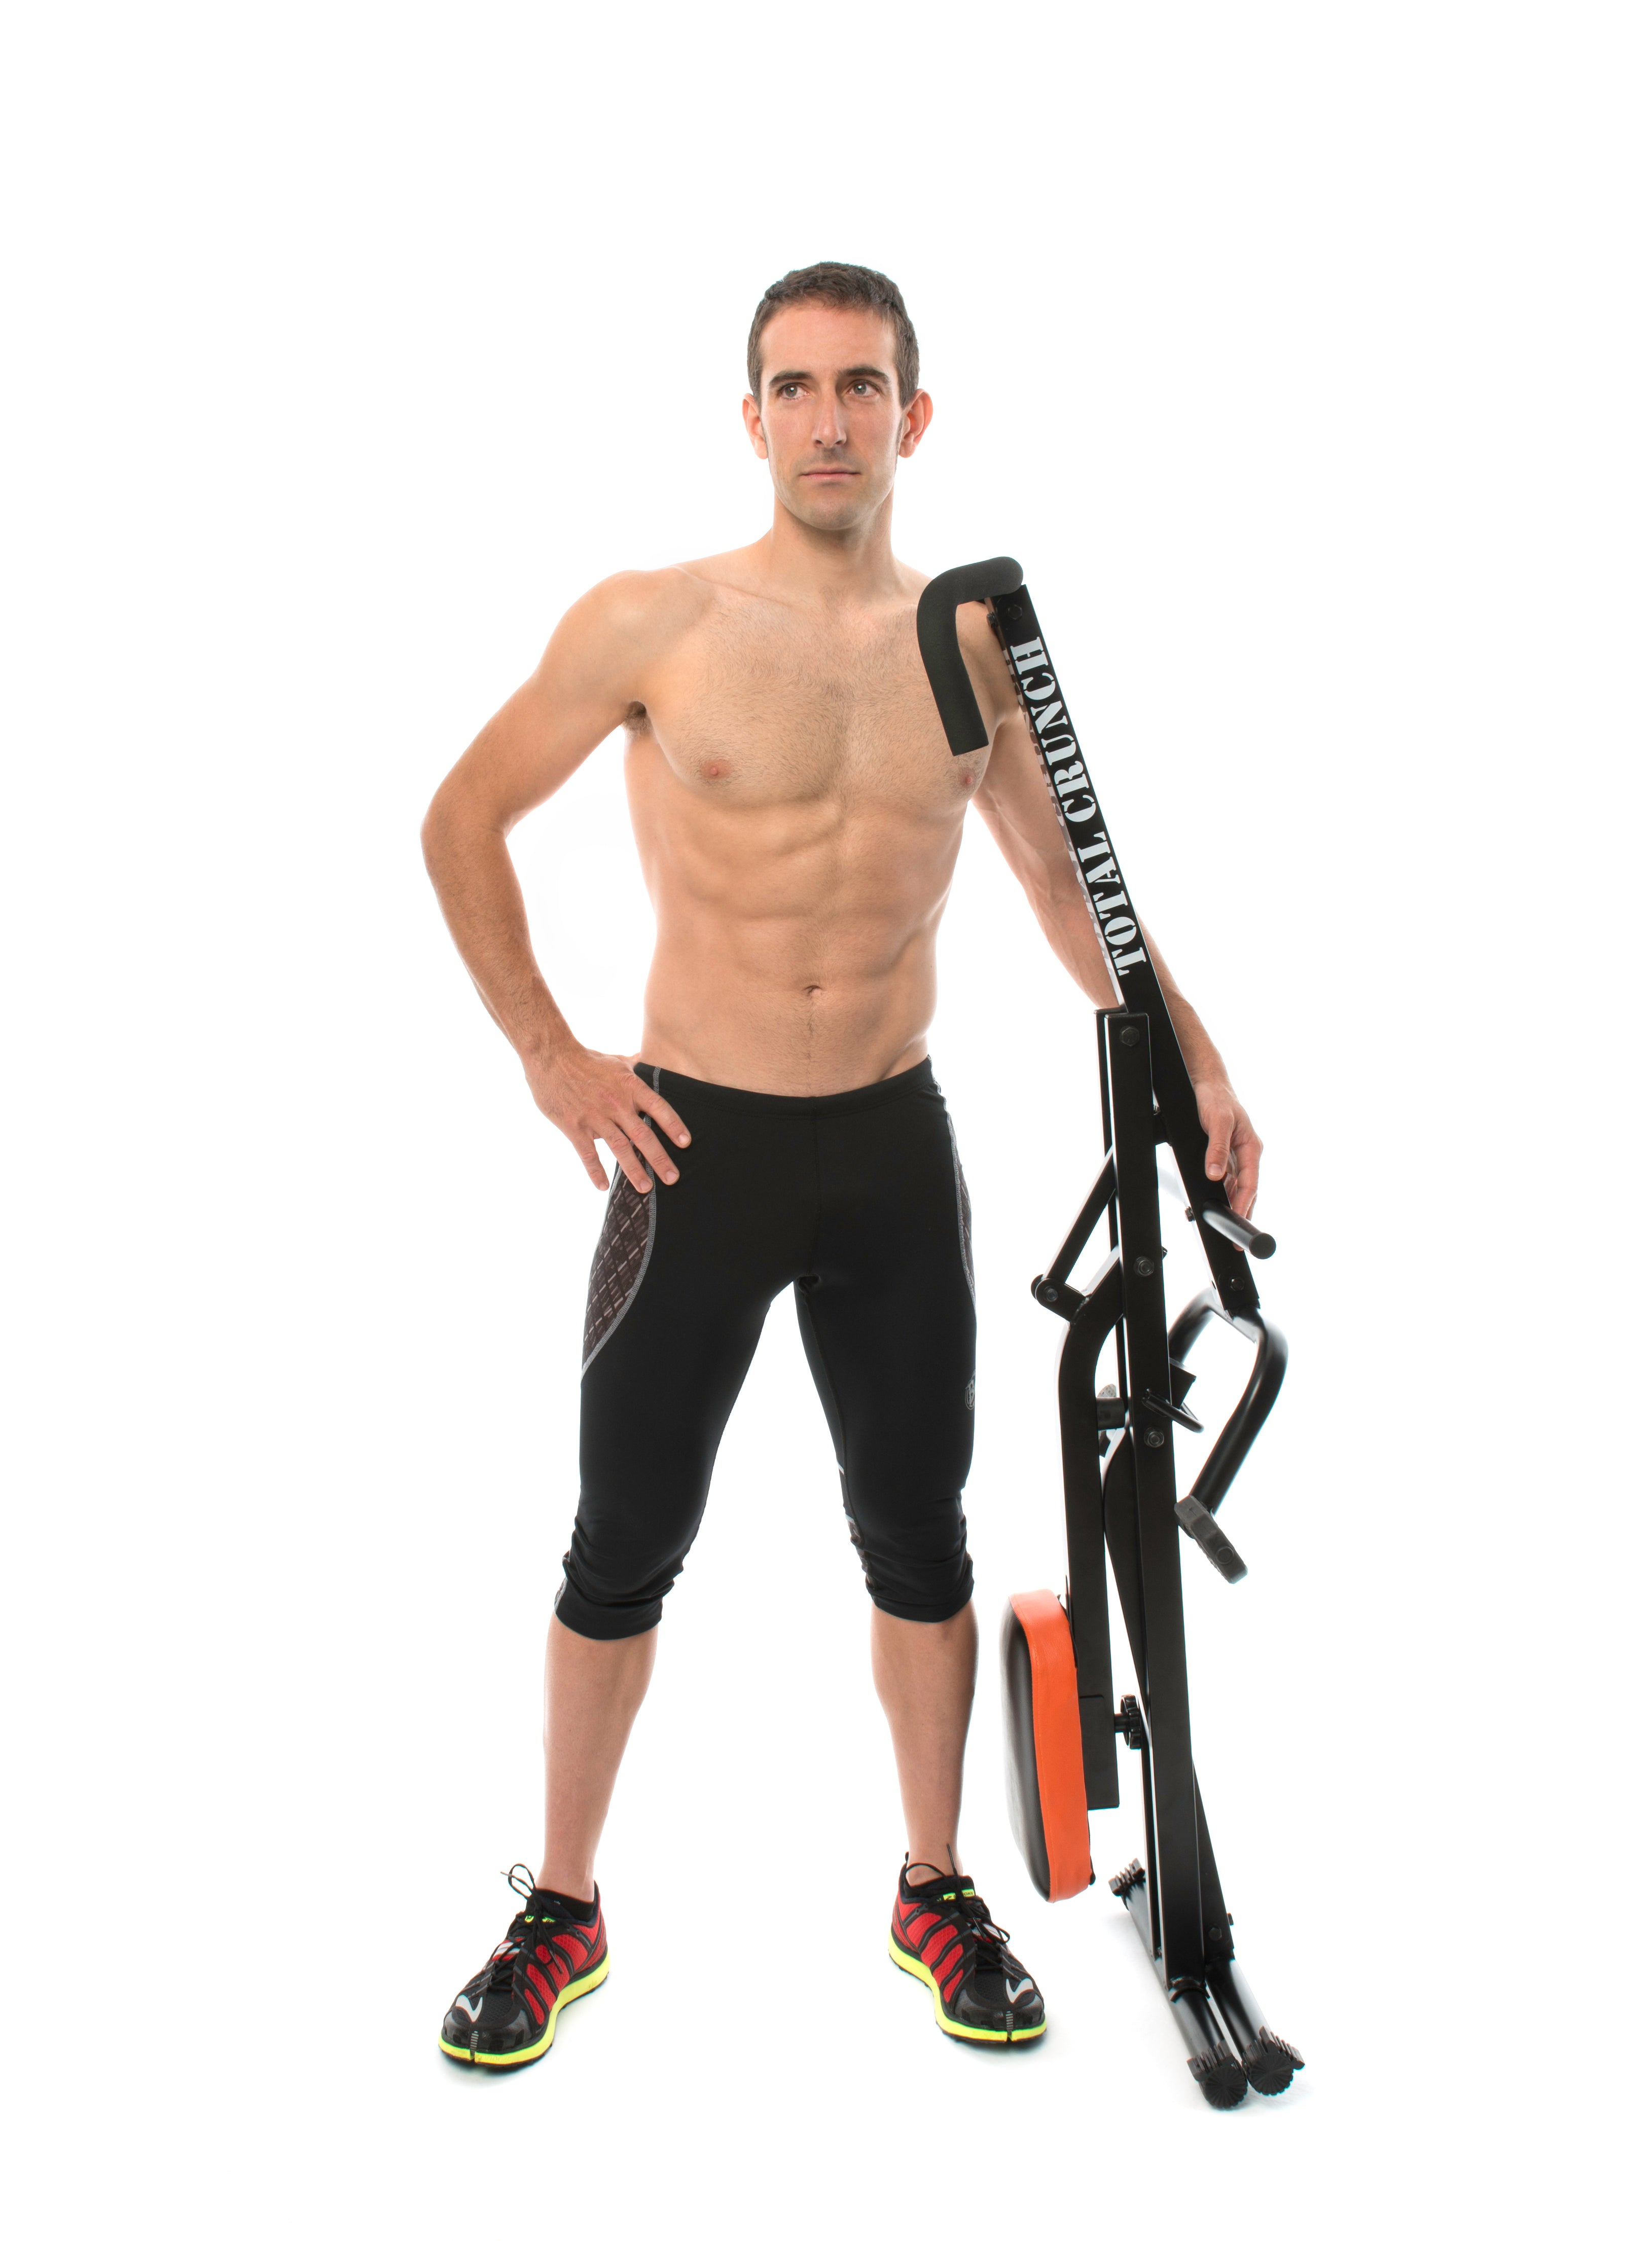 Total Crunch - Multi-exercise fitness equipment - Connect CCS - Europe